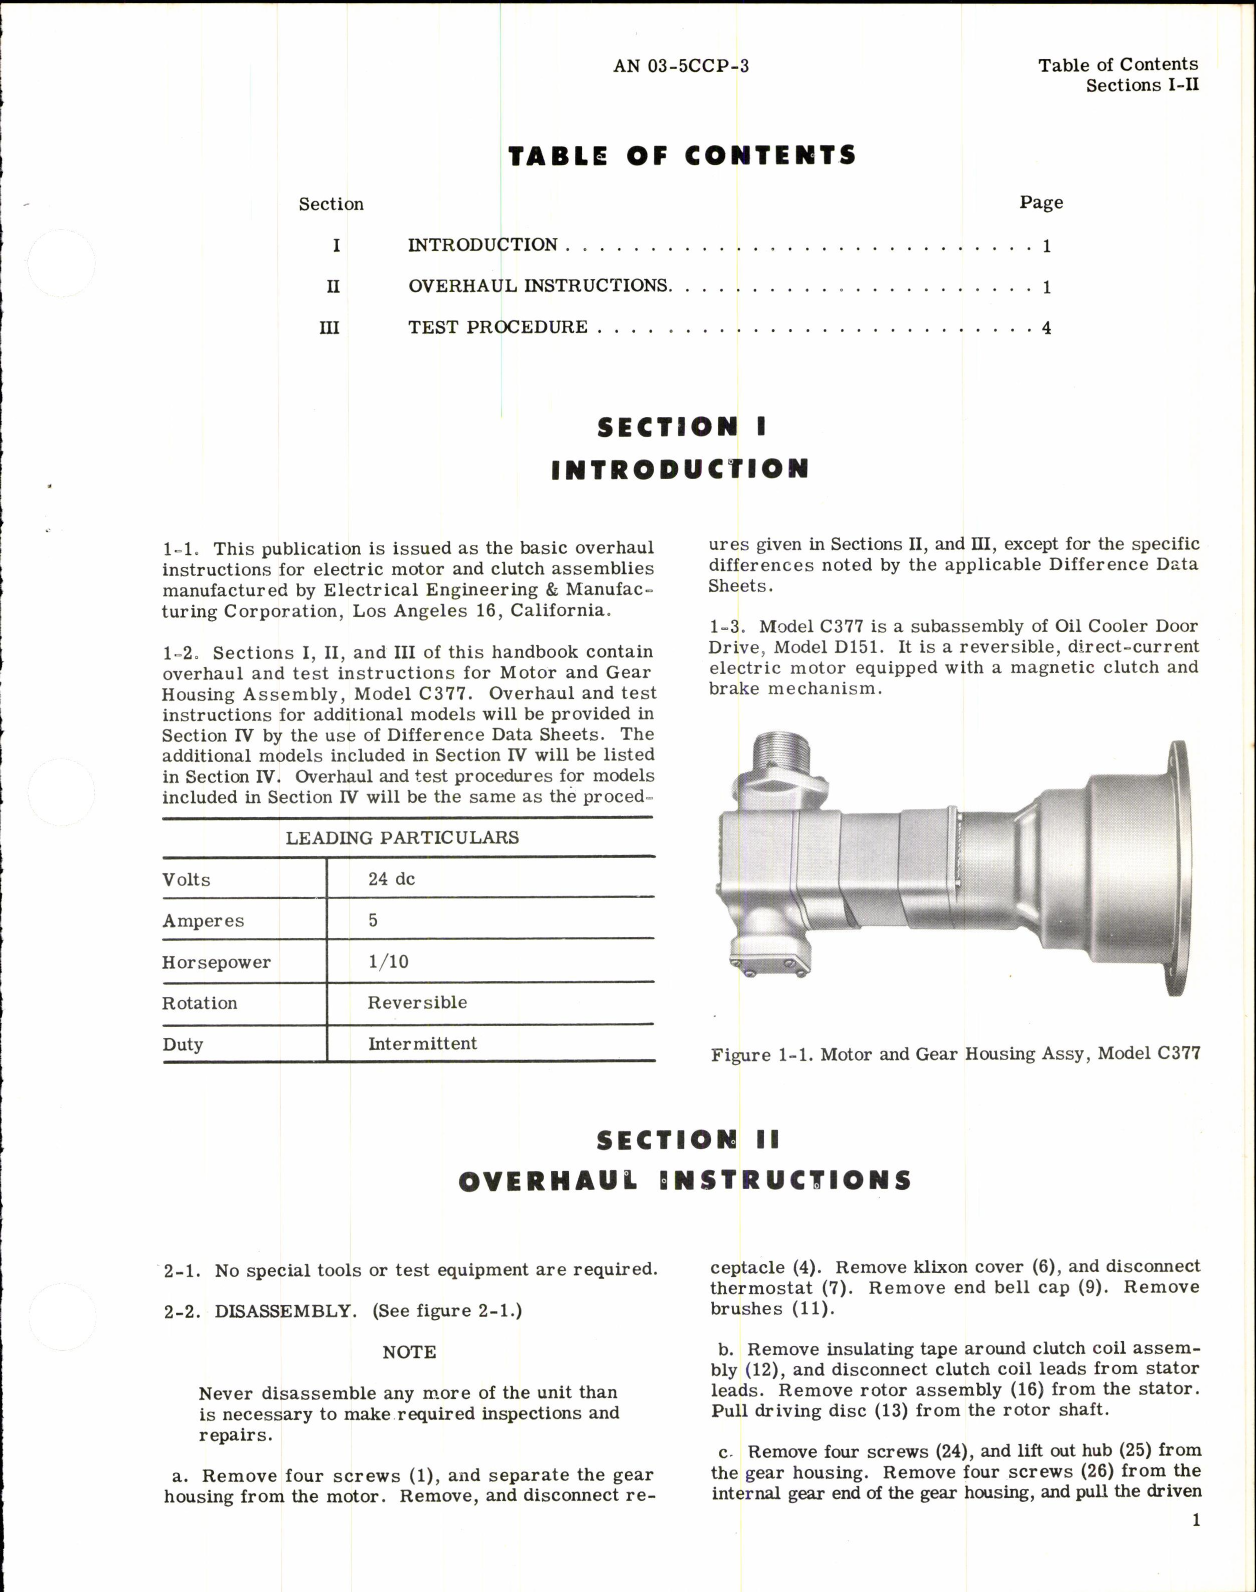 Sample page 3 from AirCorps Library document: Overhaul Instructions for Motor and Gear Housing Assembly Model C377